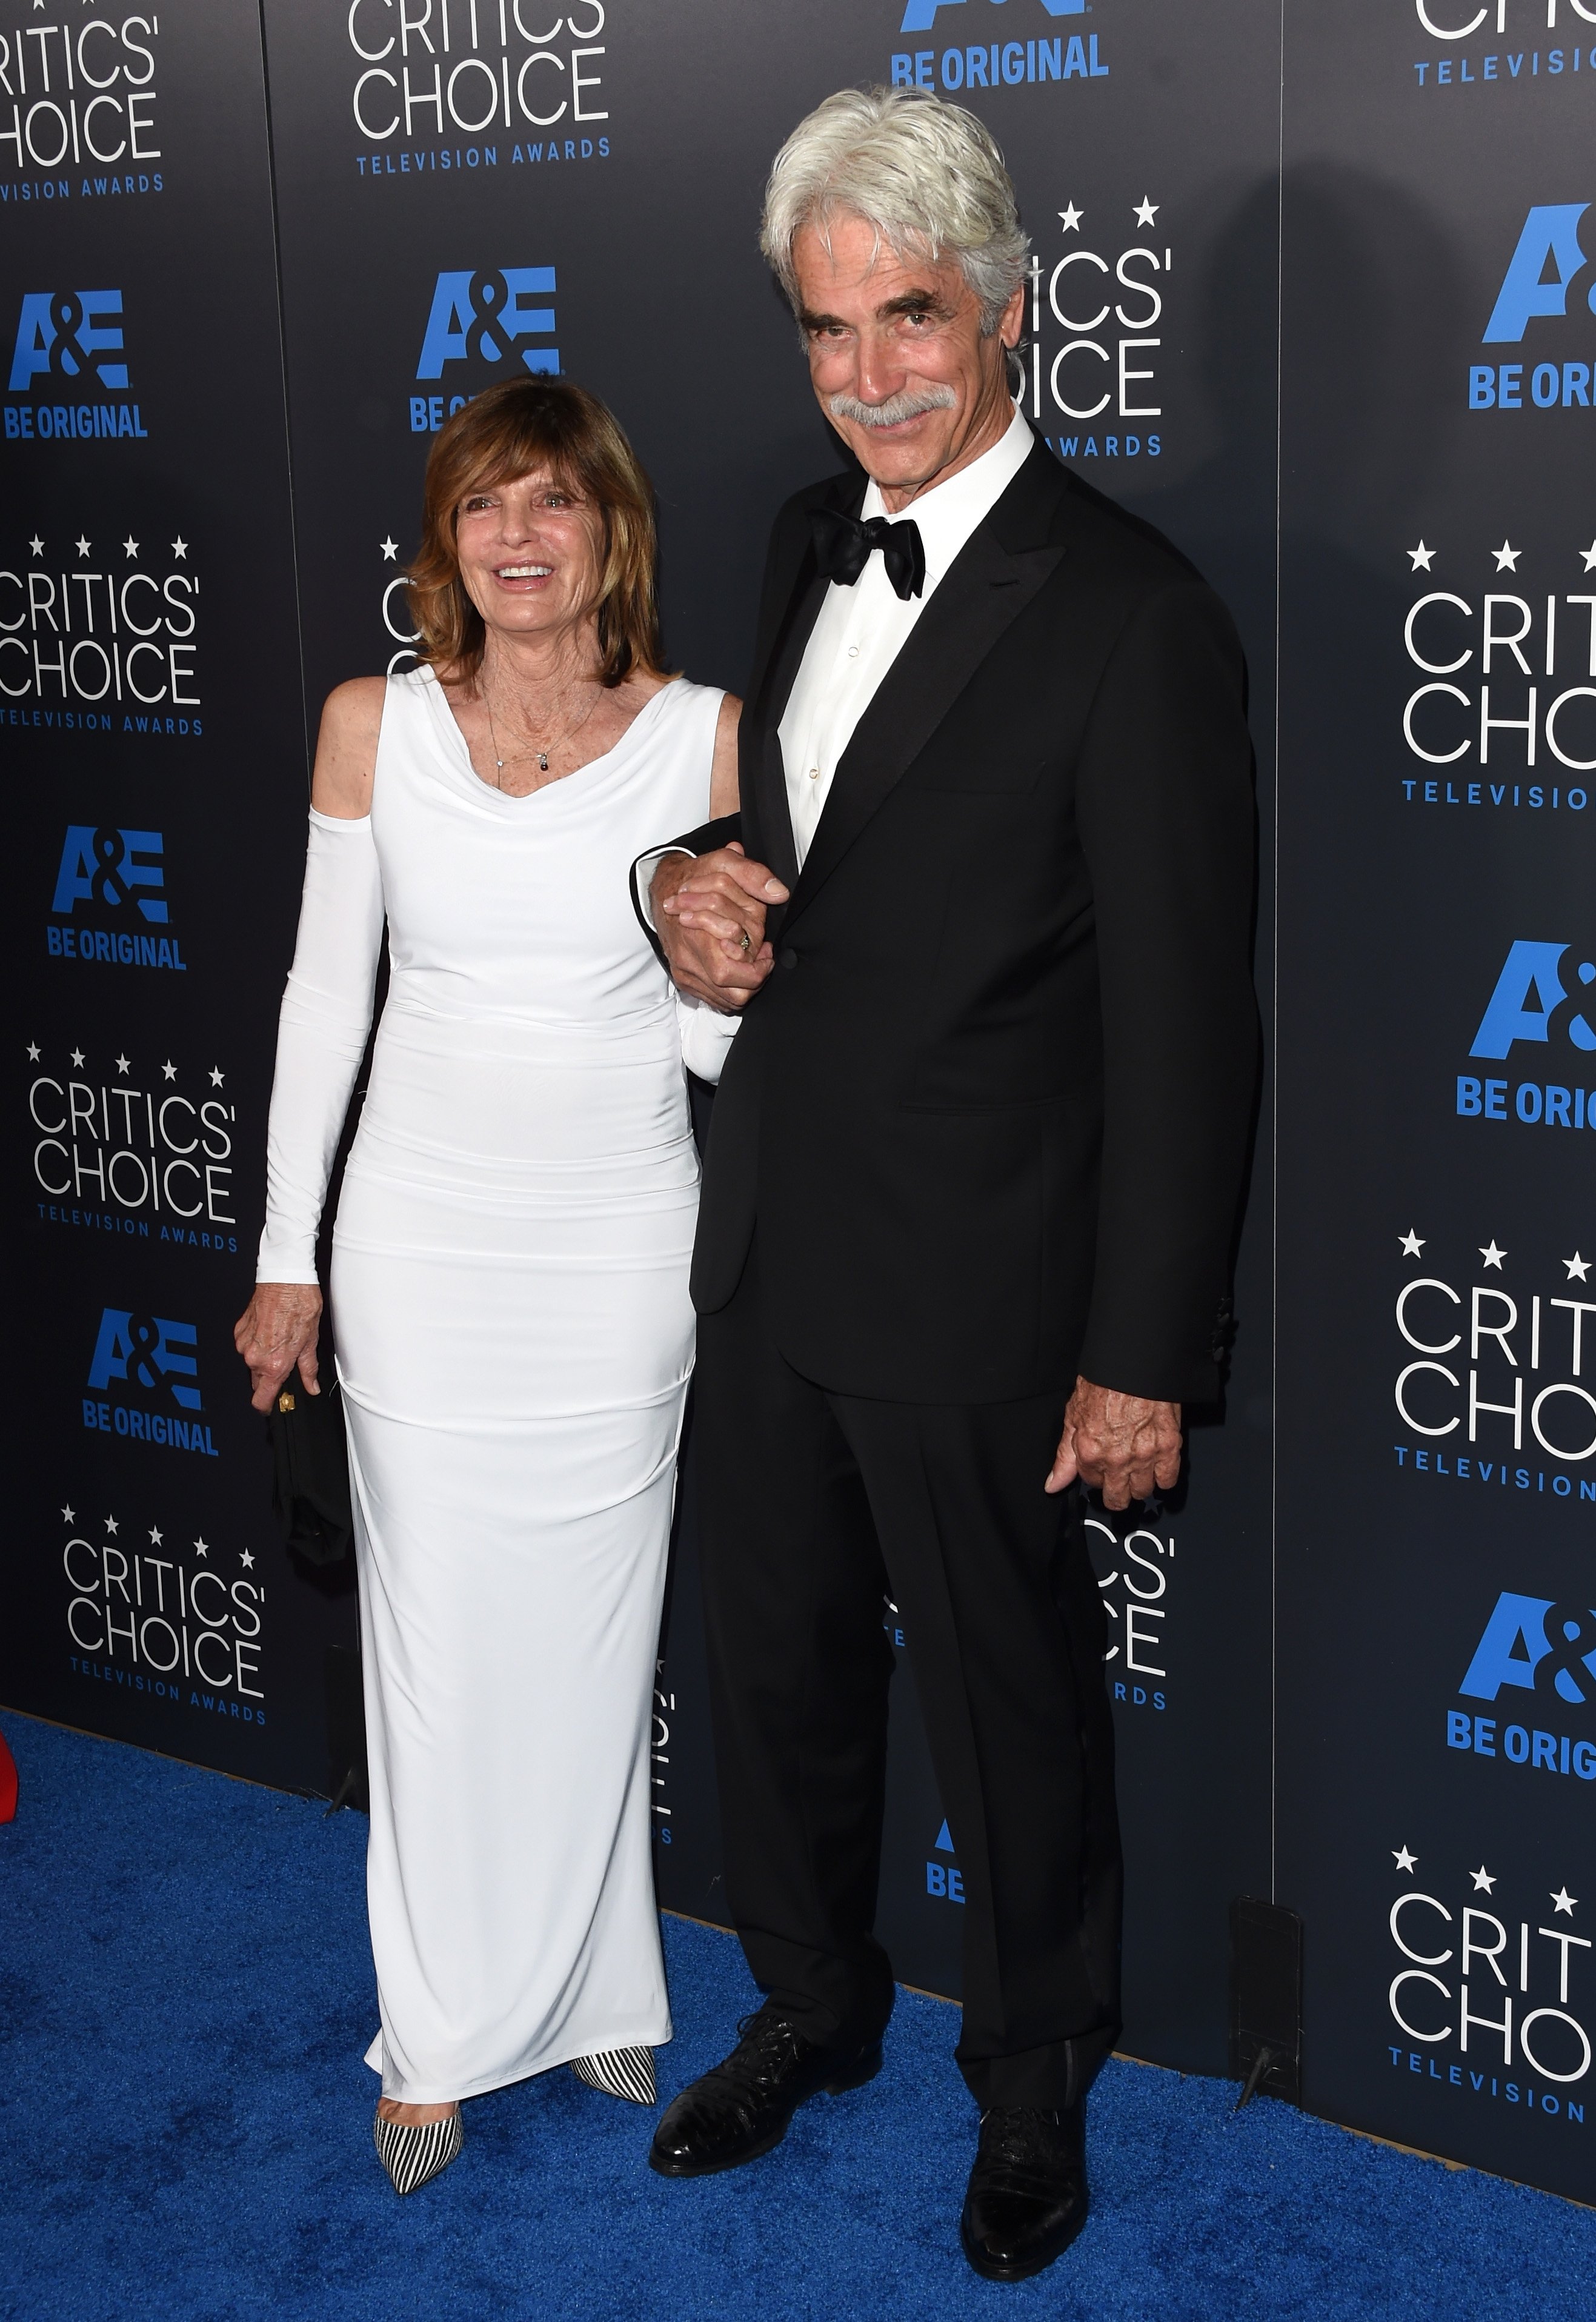 Western TV and movie star Sam Elliott and actress Katherine Ross attend the 2015 Annual Critics' Choice Television Awards in Beverly Hills. | Photo: Getty Images